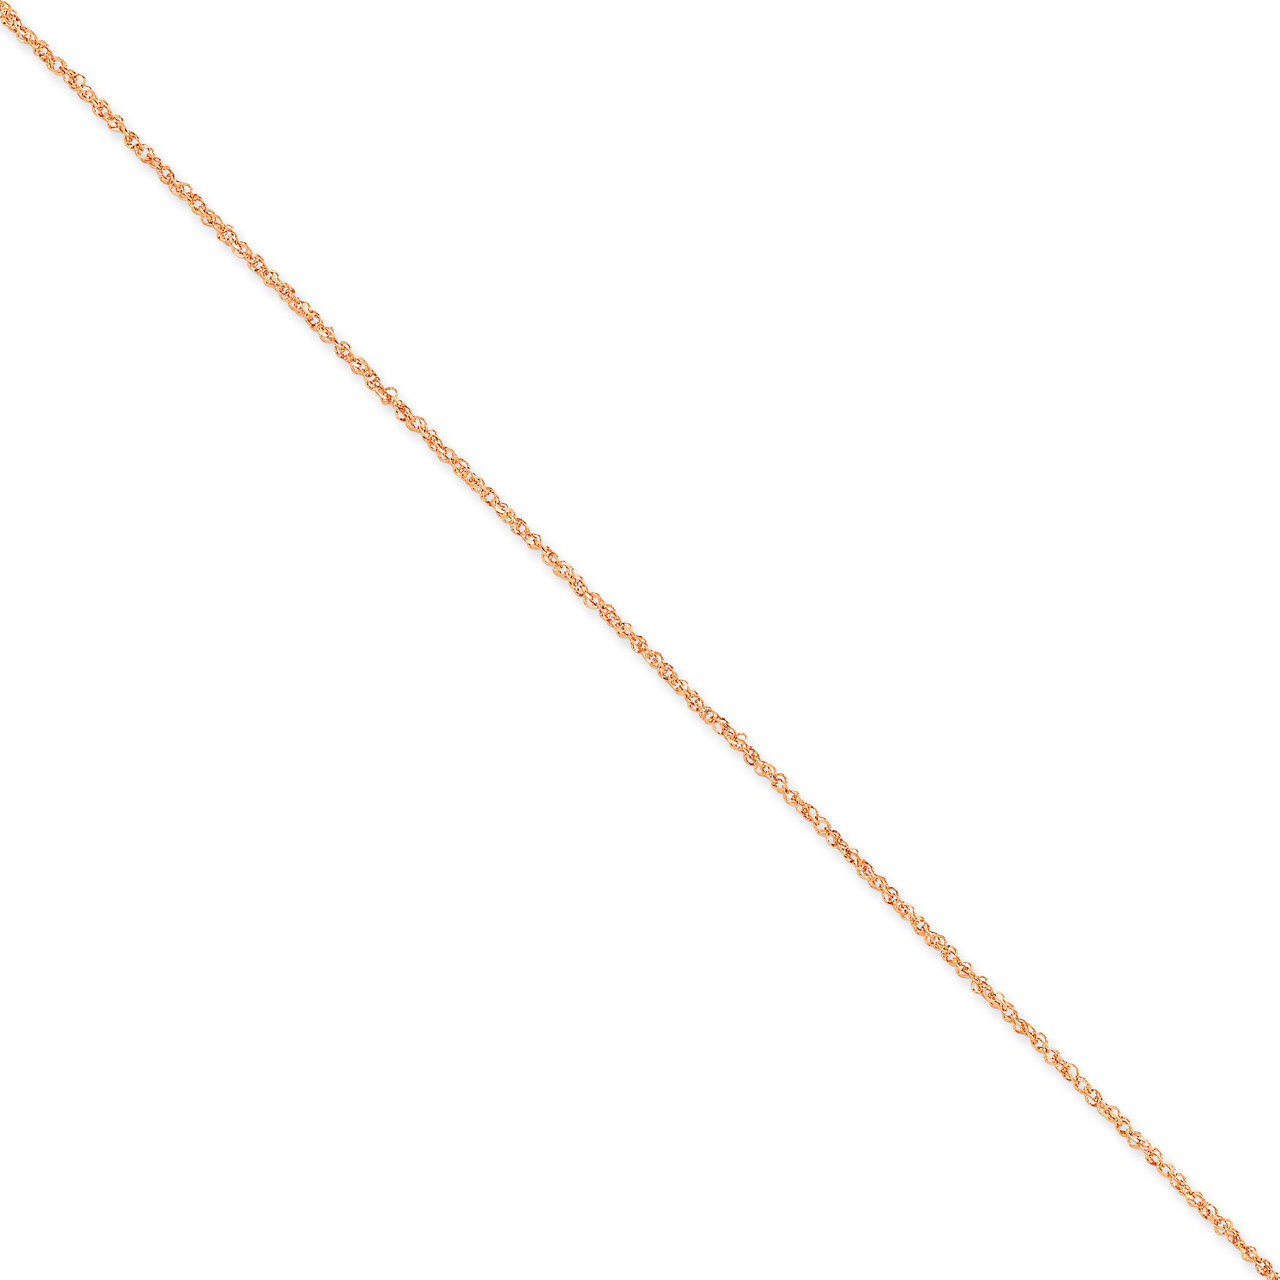 1.7mm Ropa Chain Anklet 10 Inch 14k Rose Gold RSC28-10